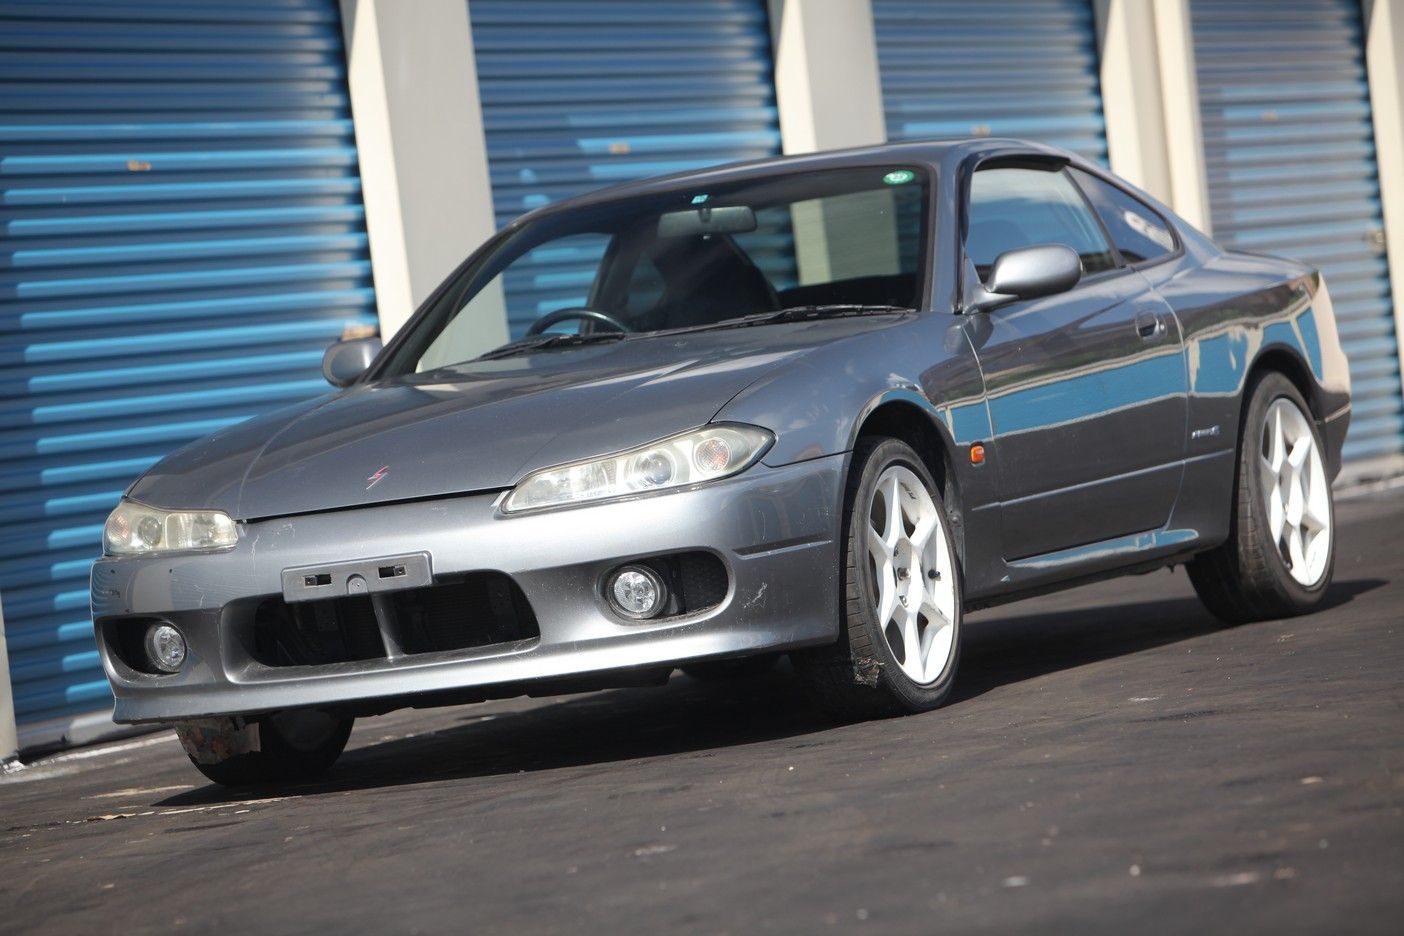 2001 Nissan silvia s15 for sale